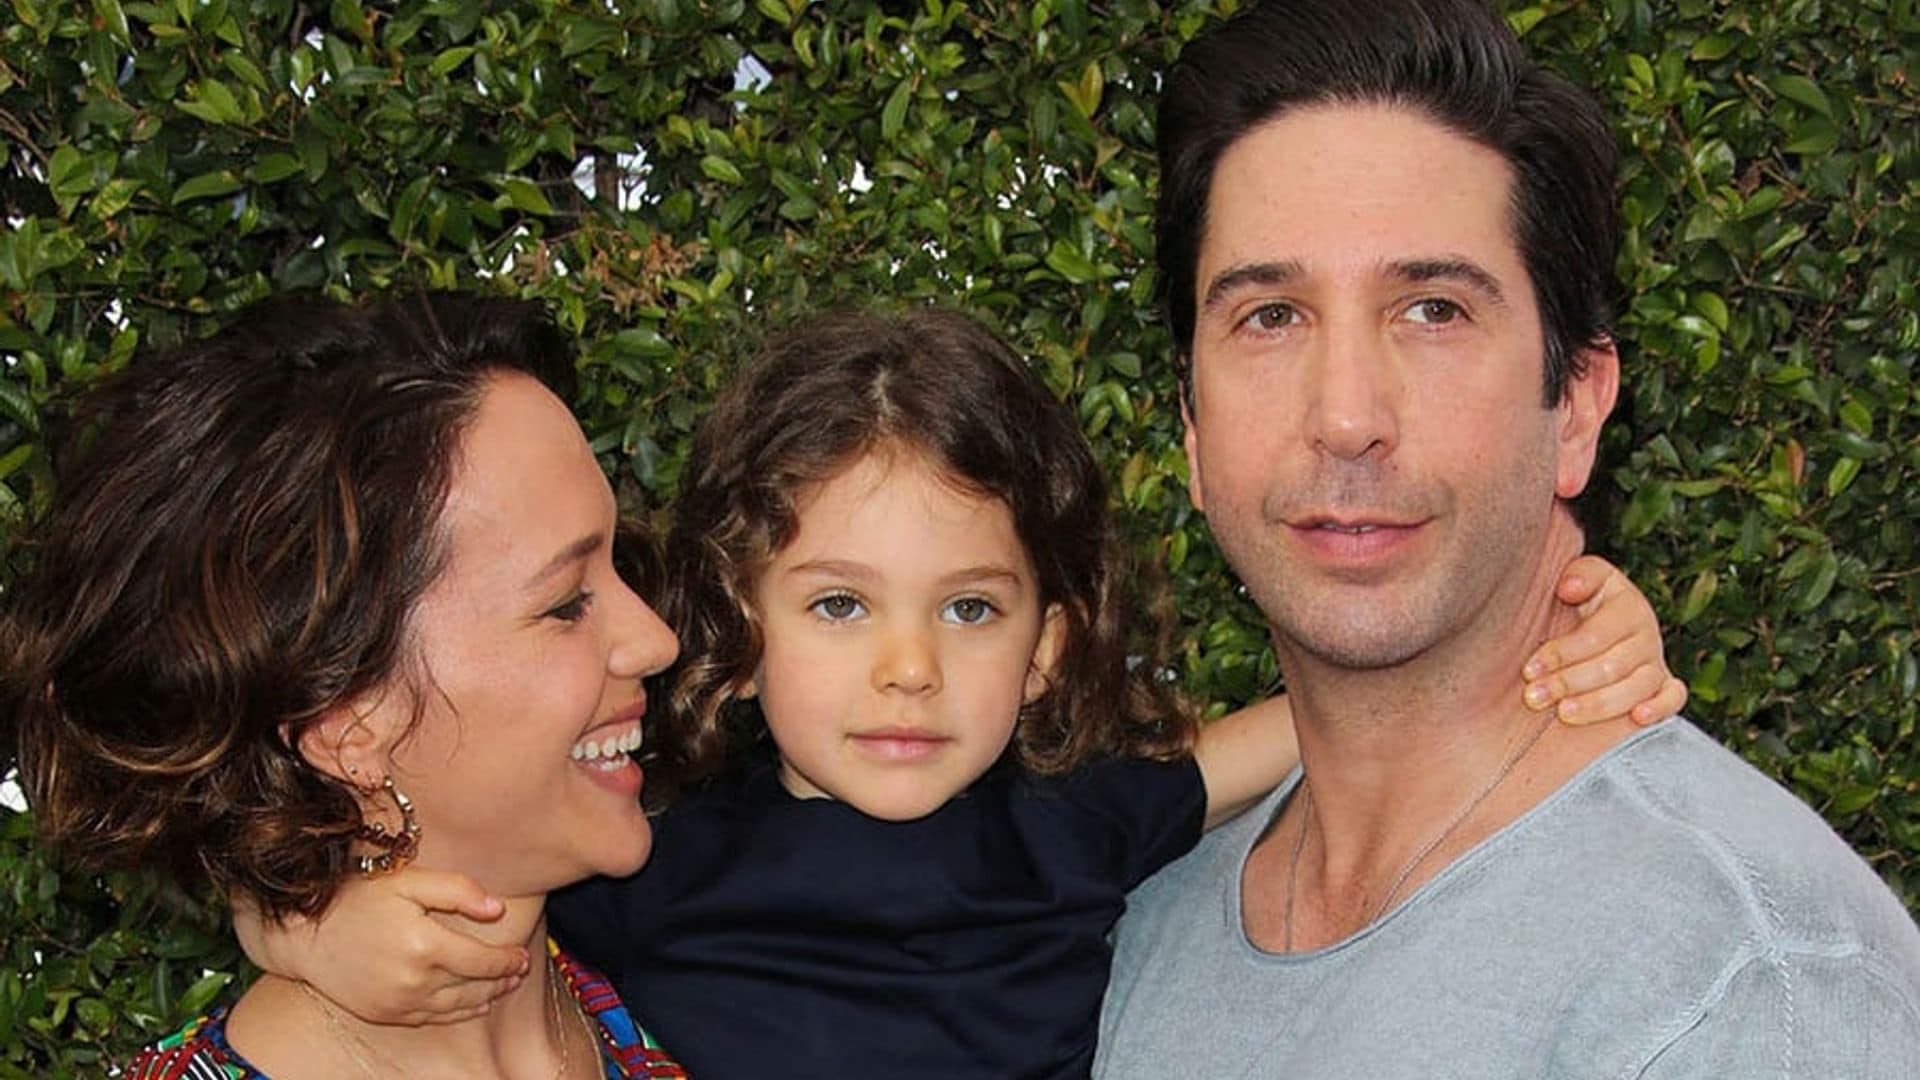 Find out what happened when David Schwimmer's 5-year-old daughter Cleo tasted beer